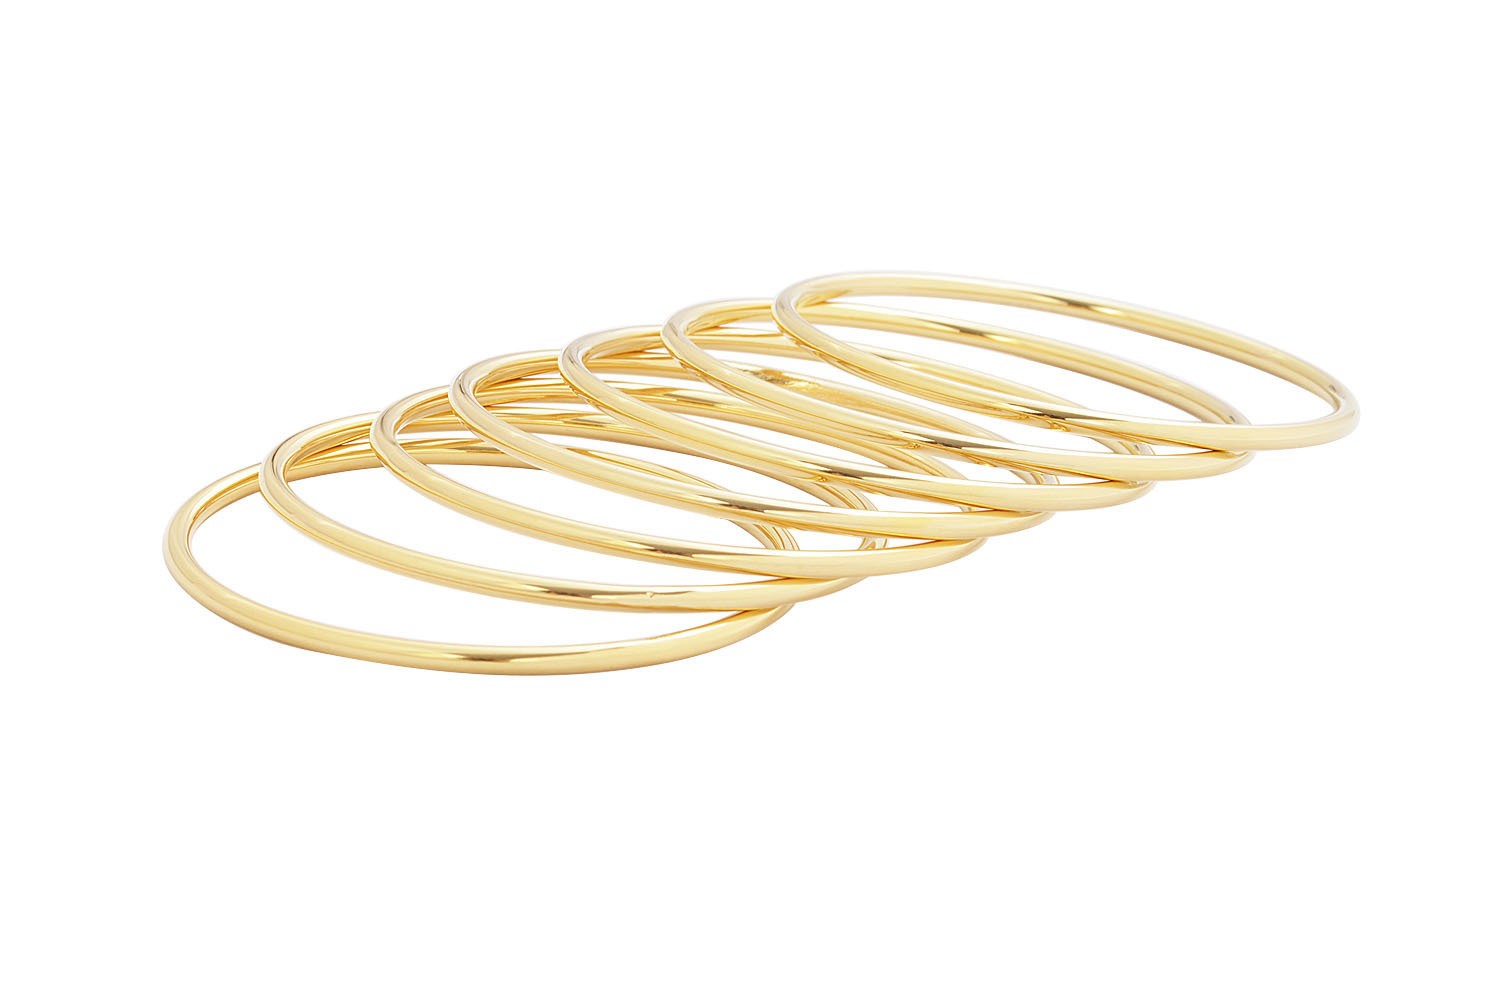 Stainless Steel Gold Tone 7 Pieces Bangle Set